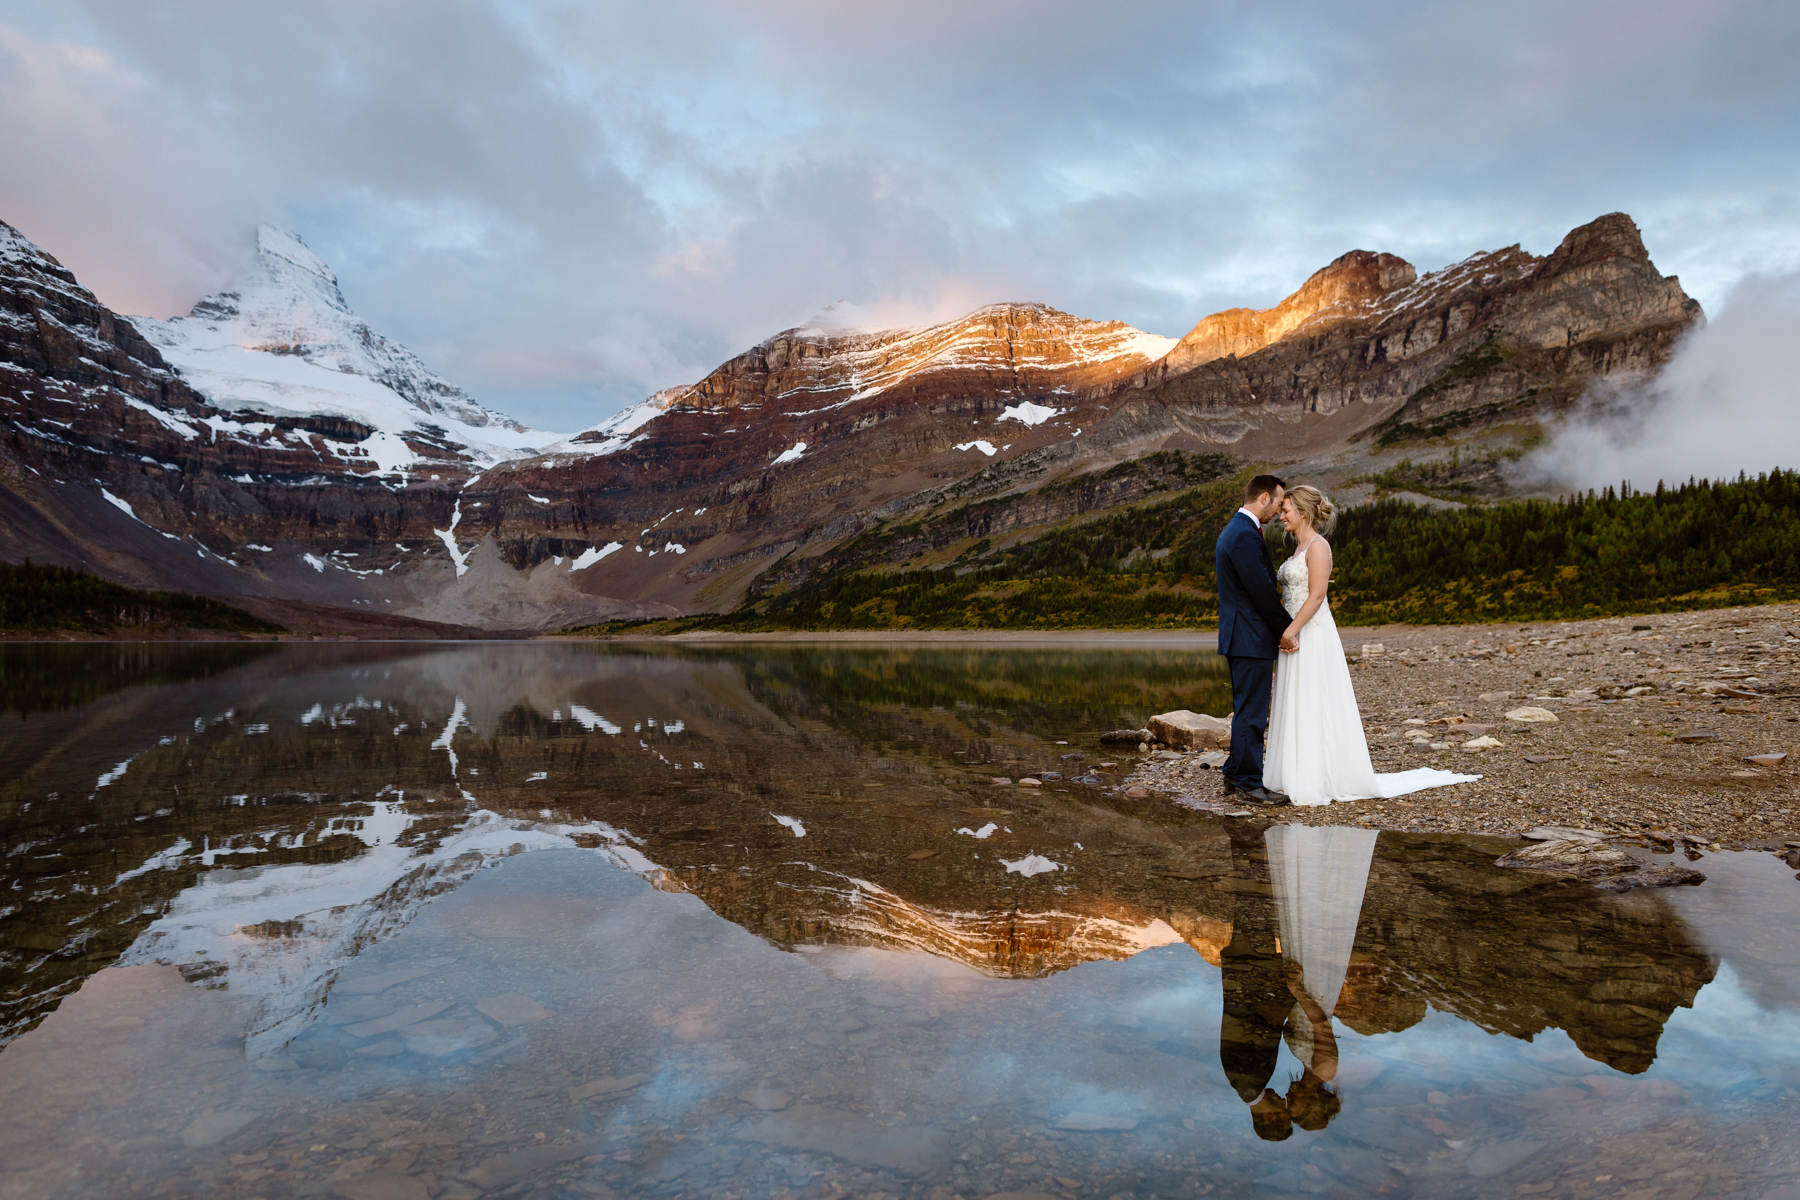 Mount Assiniboine Elopement Photographers at a Backcountry Lodge - Photo 51